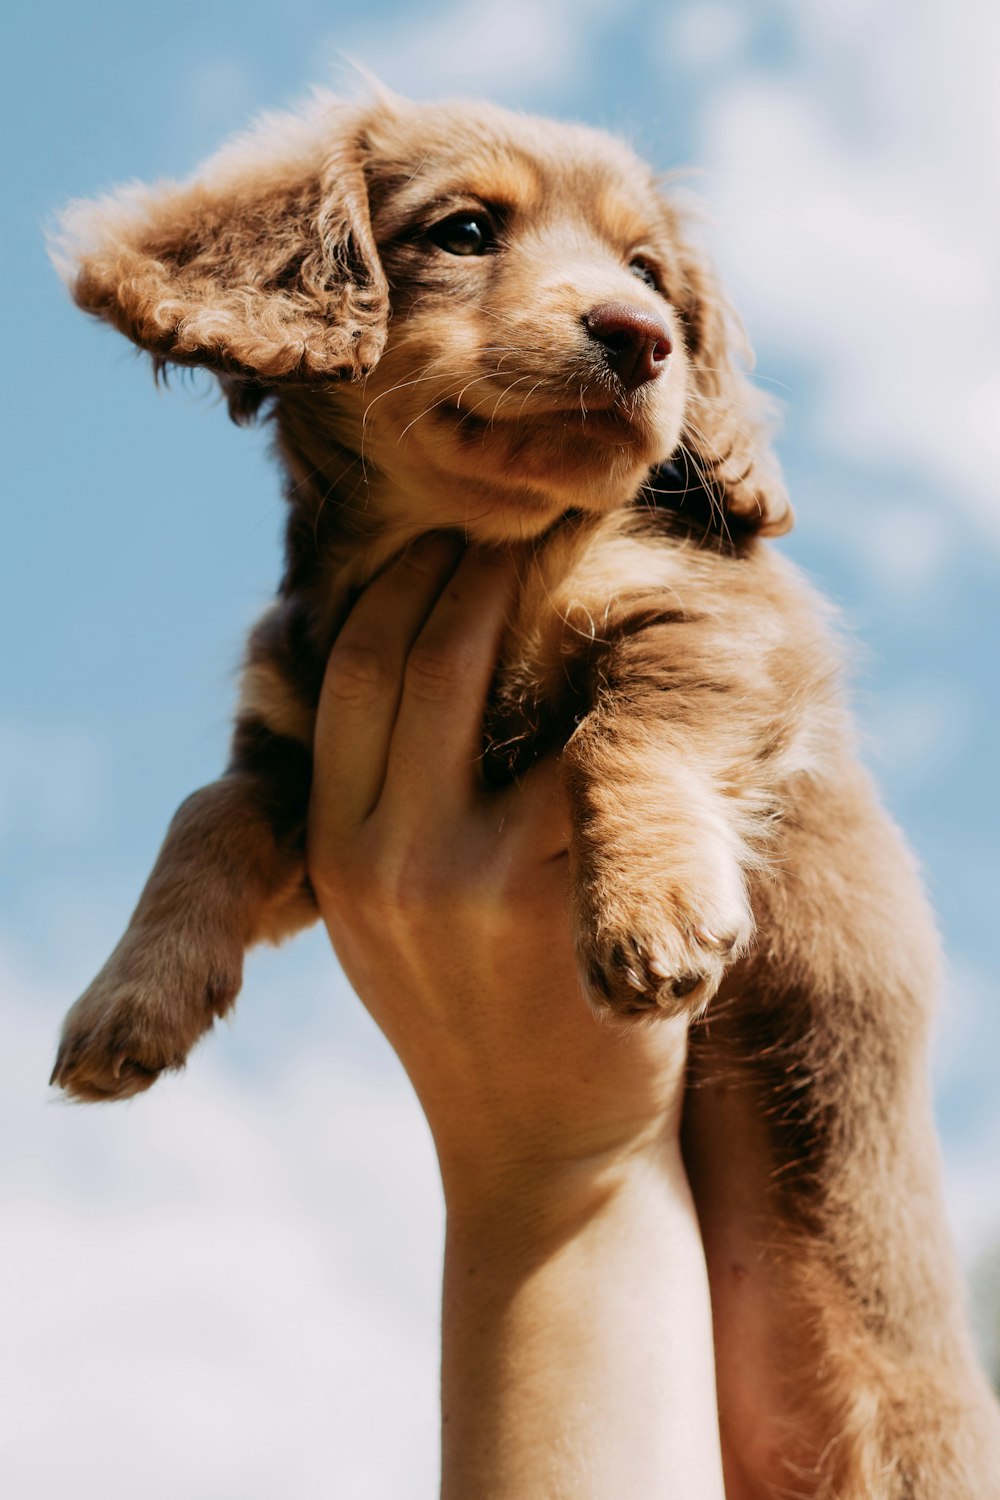 a person holding a puppy up in the air